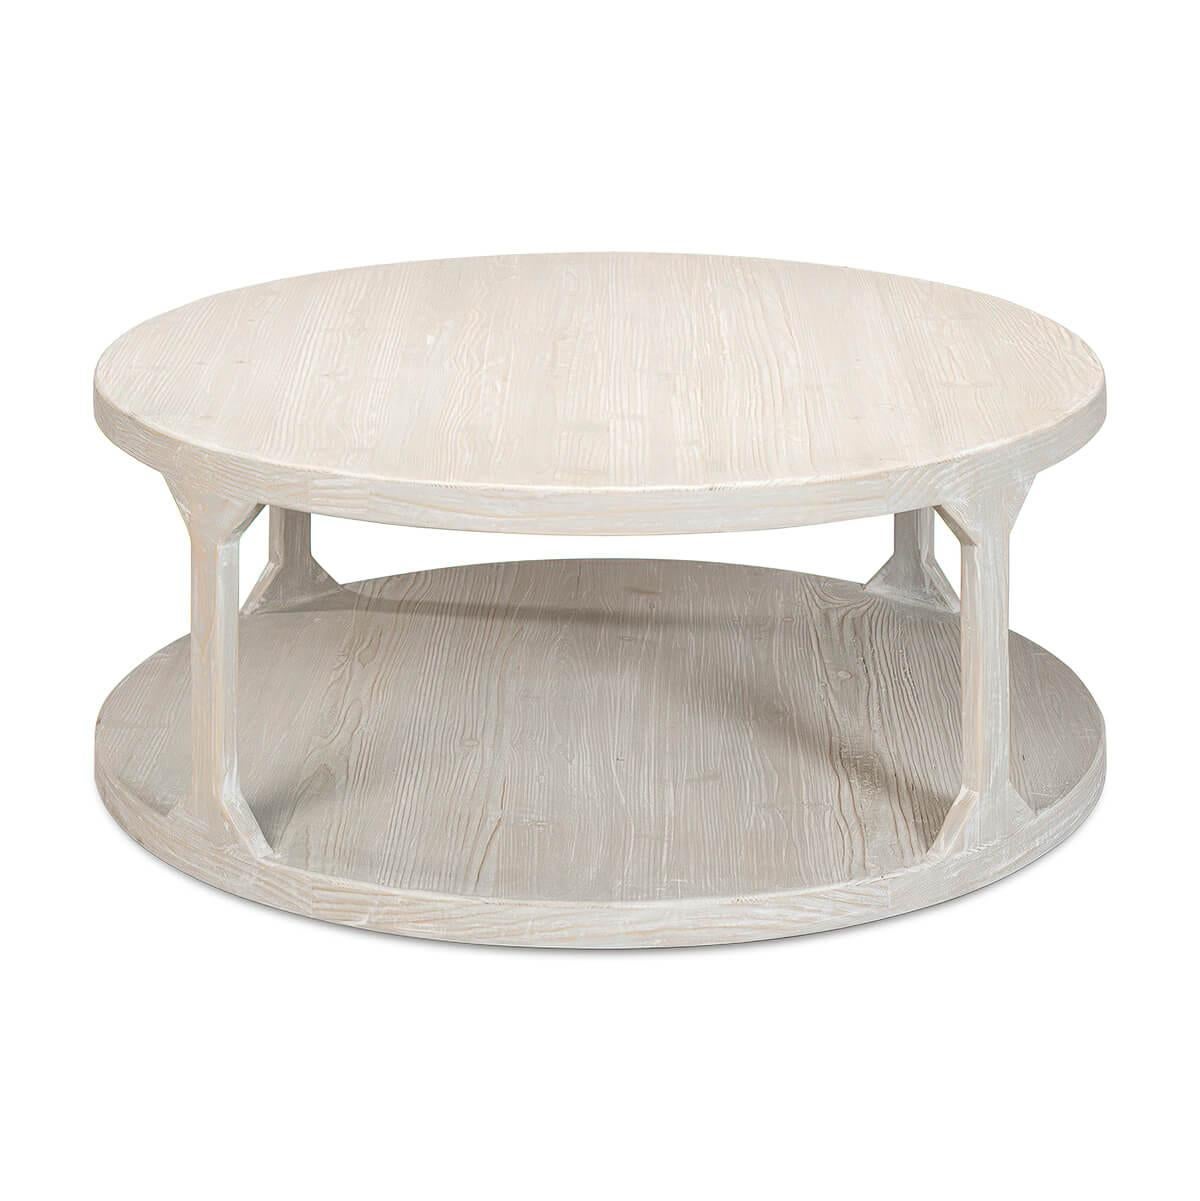 Organic modern round coffee table, the two-tier table finished in a grey wash over pine.

Dimensions: 45